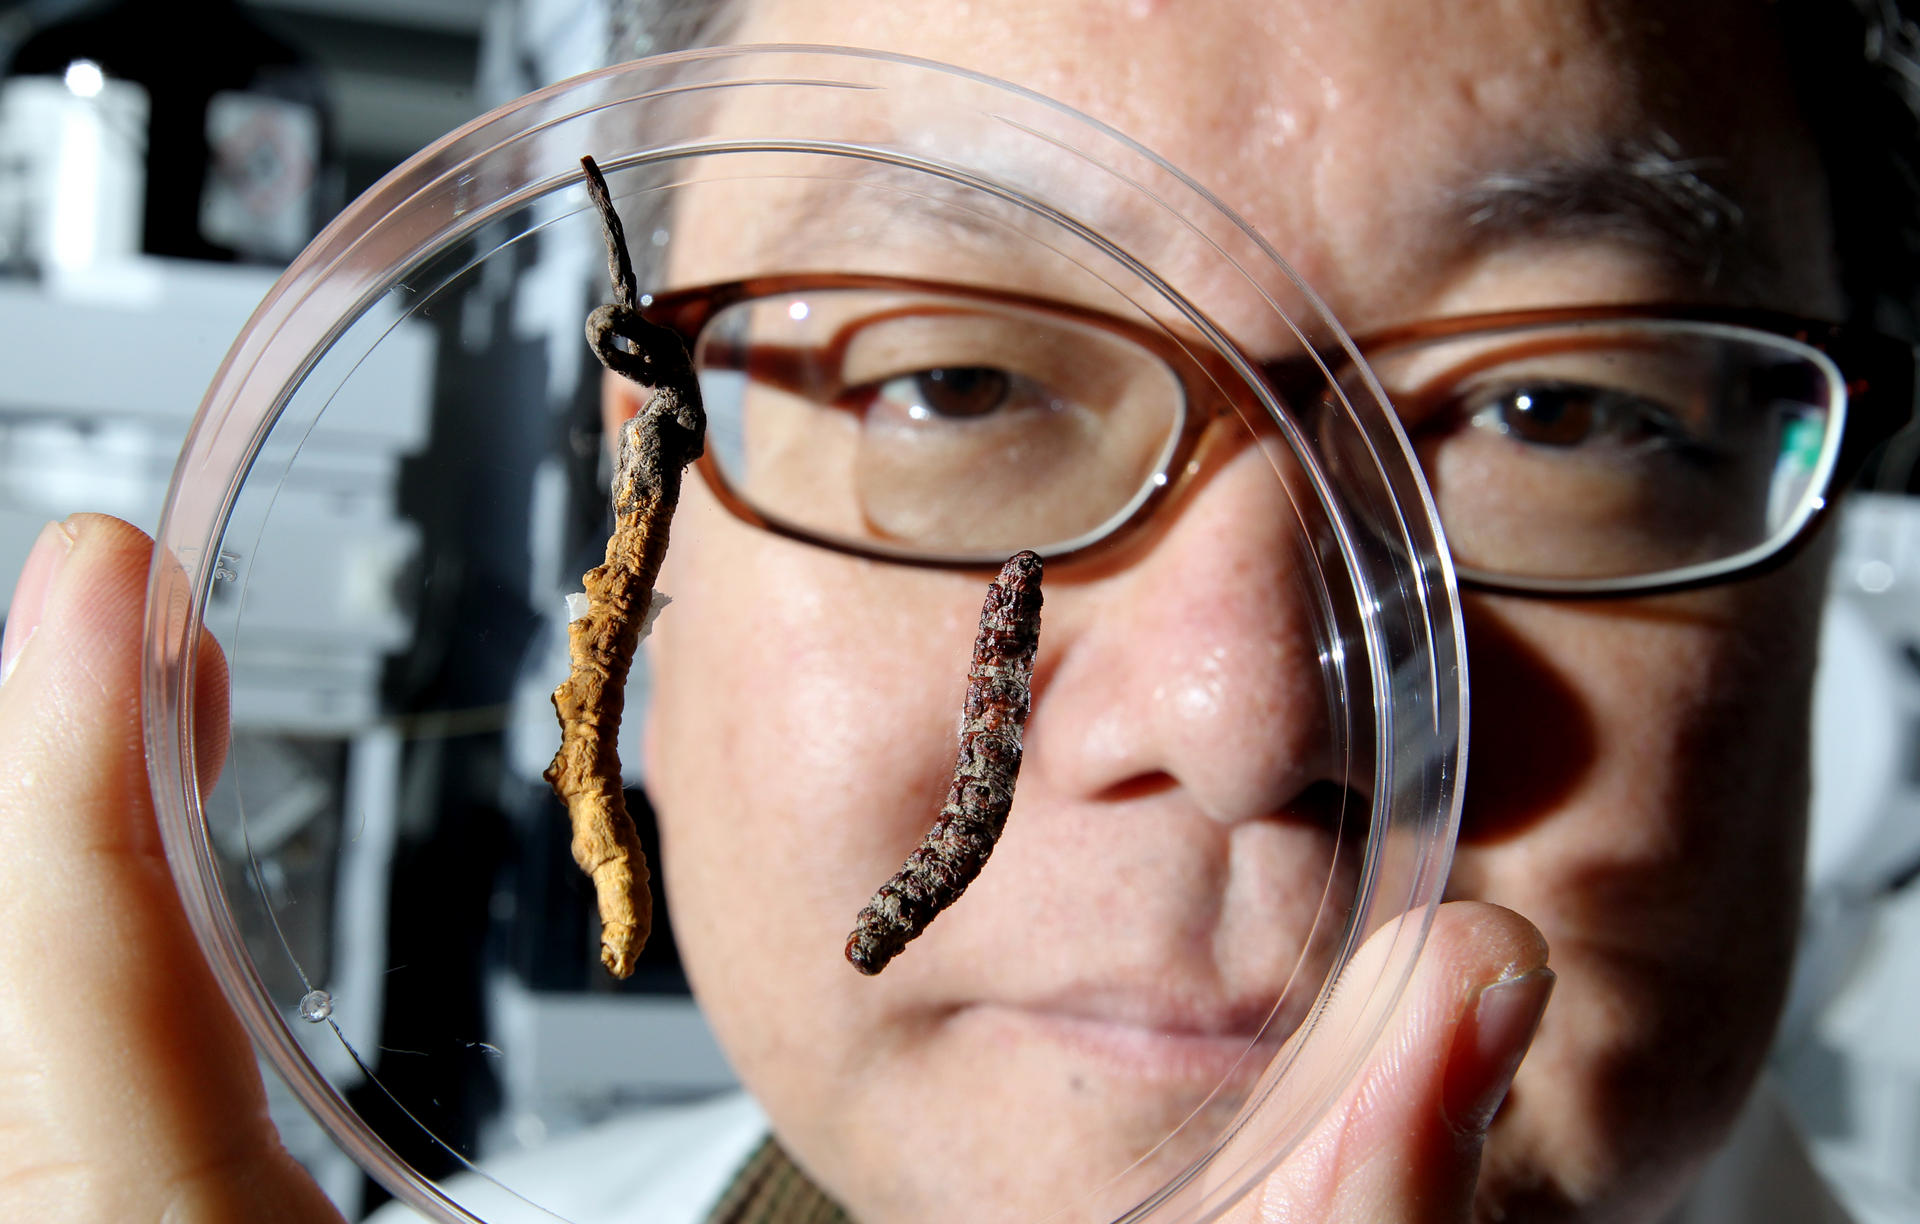 Professor Karl Tsim of HKUST holds up examples of genuine (left) and counterfeit caterpillar fungus. Photo: Dickson Lee